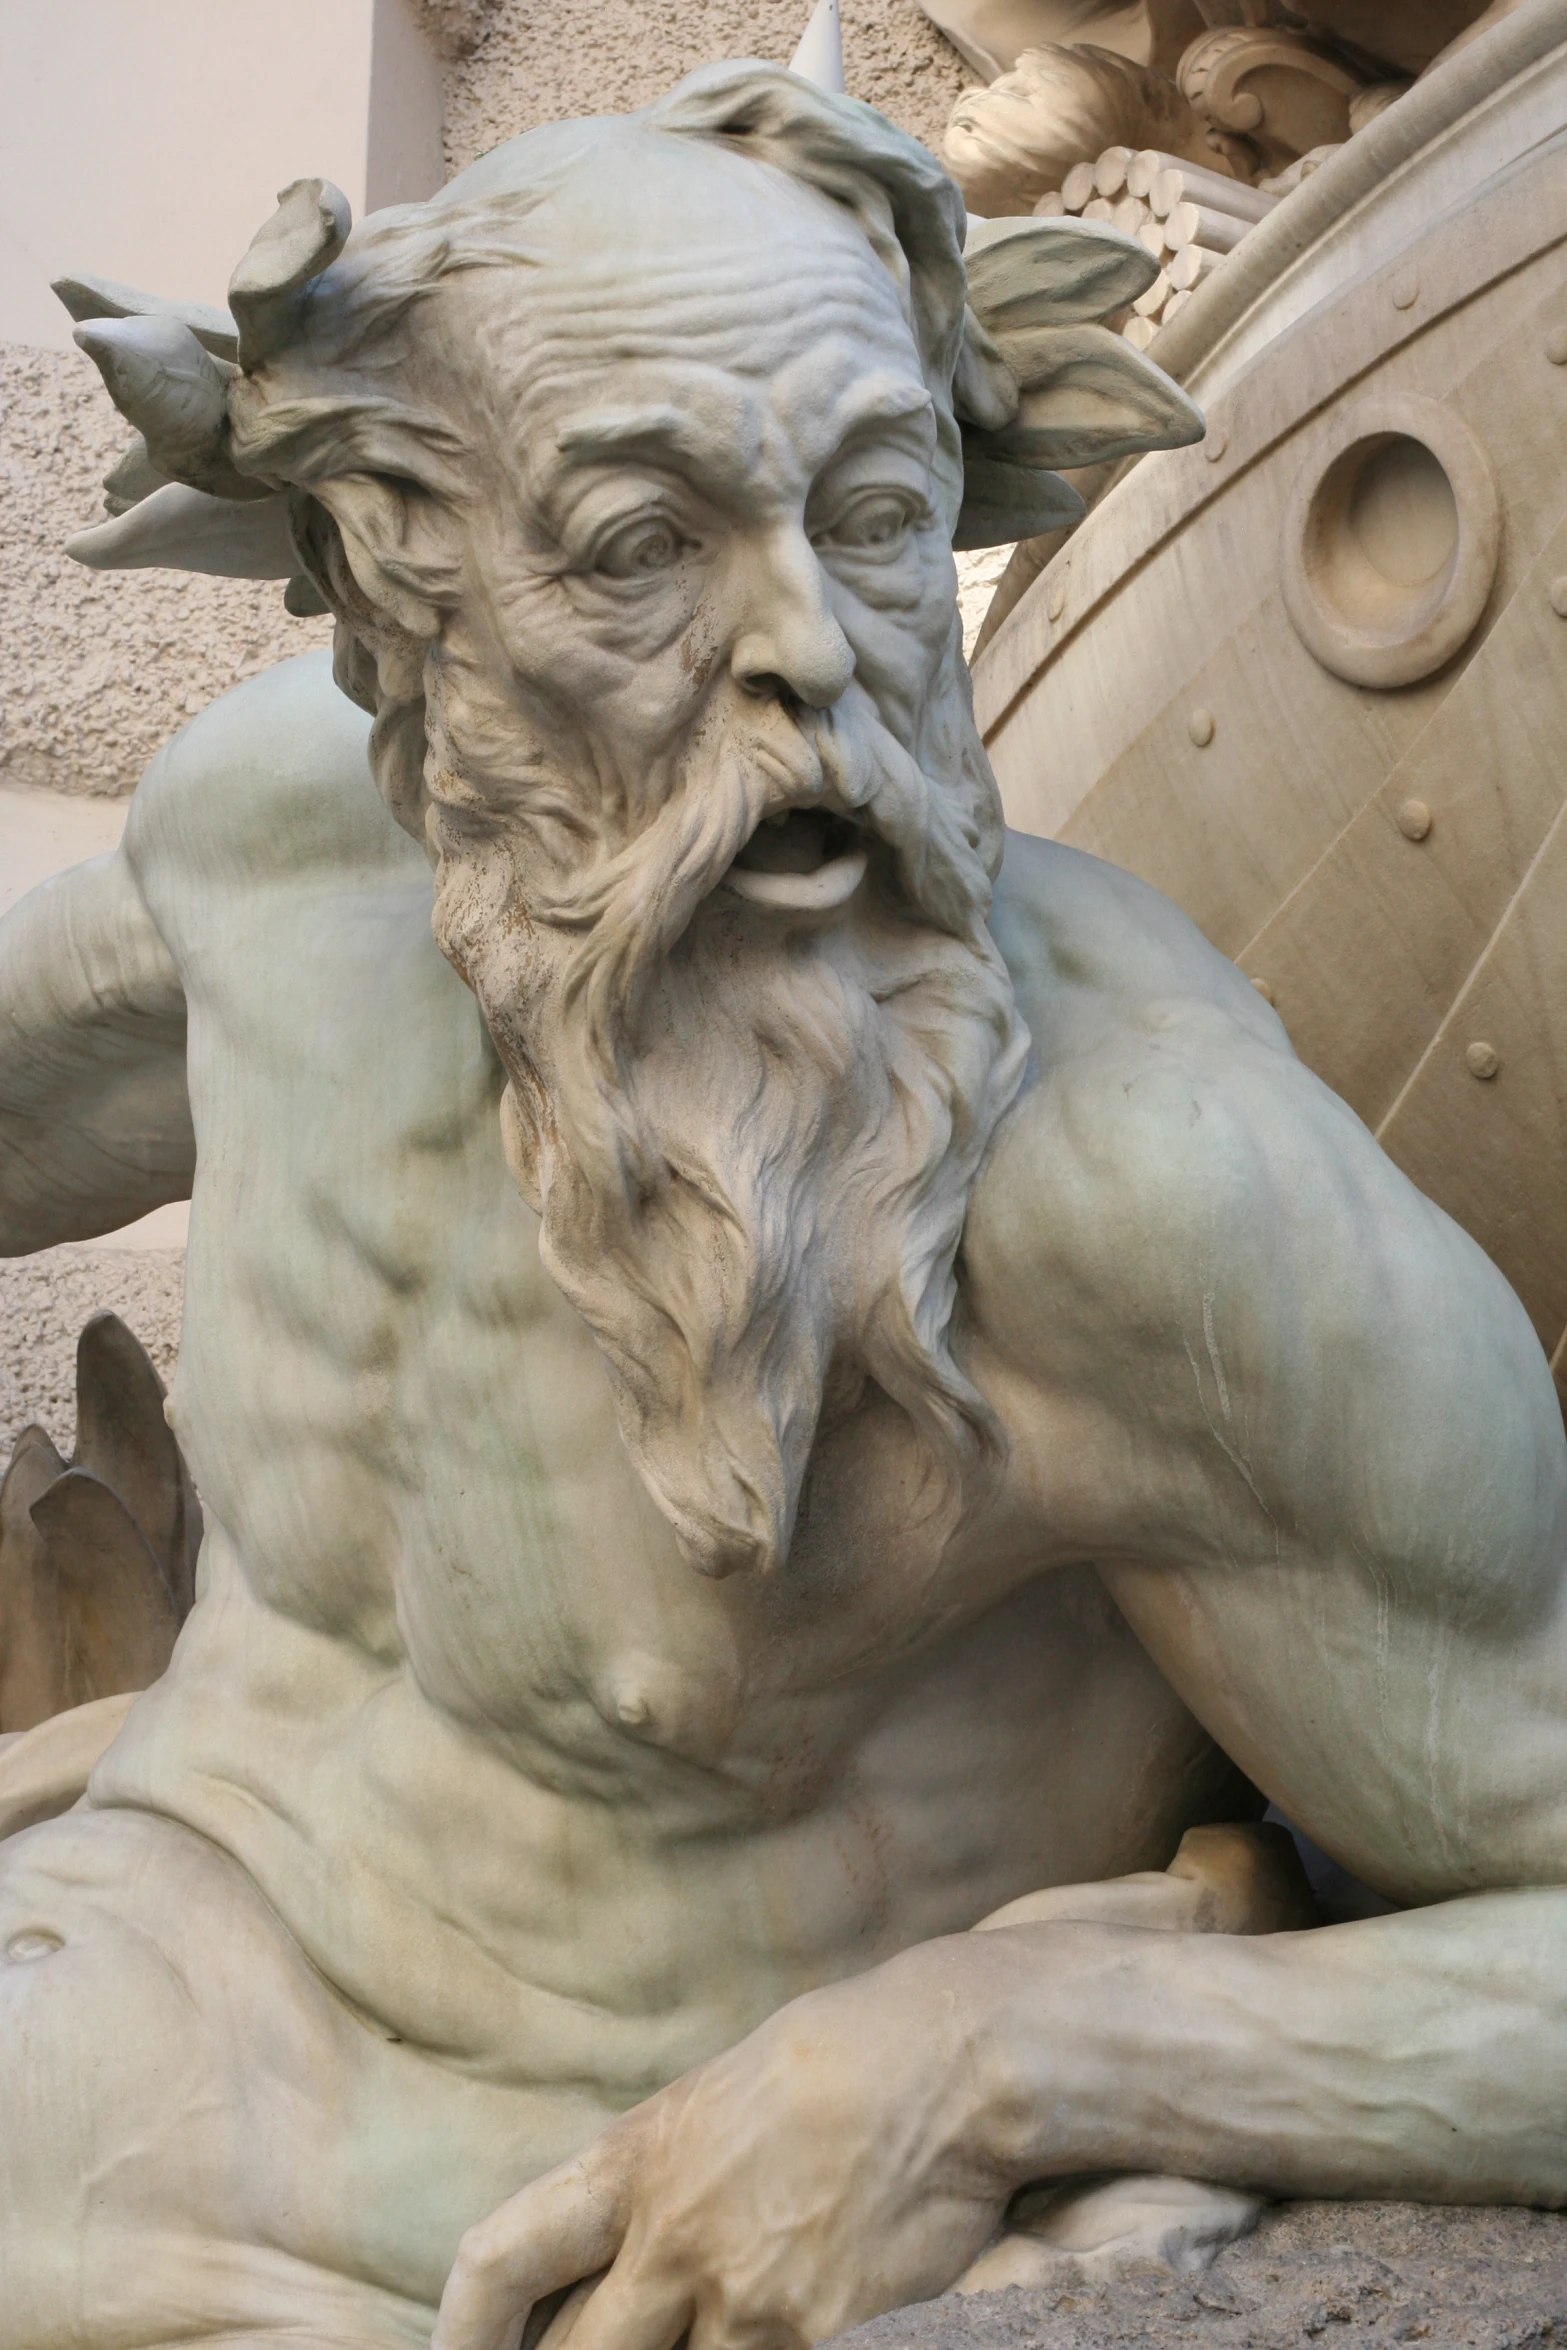 a statue in the form of a man with an evil expression